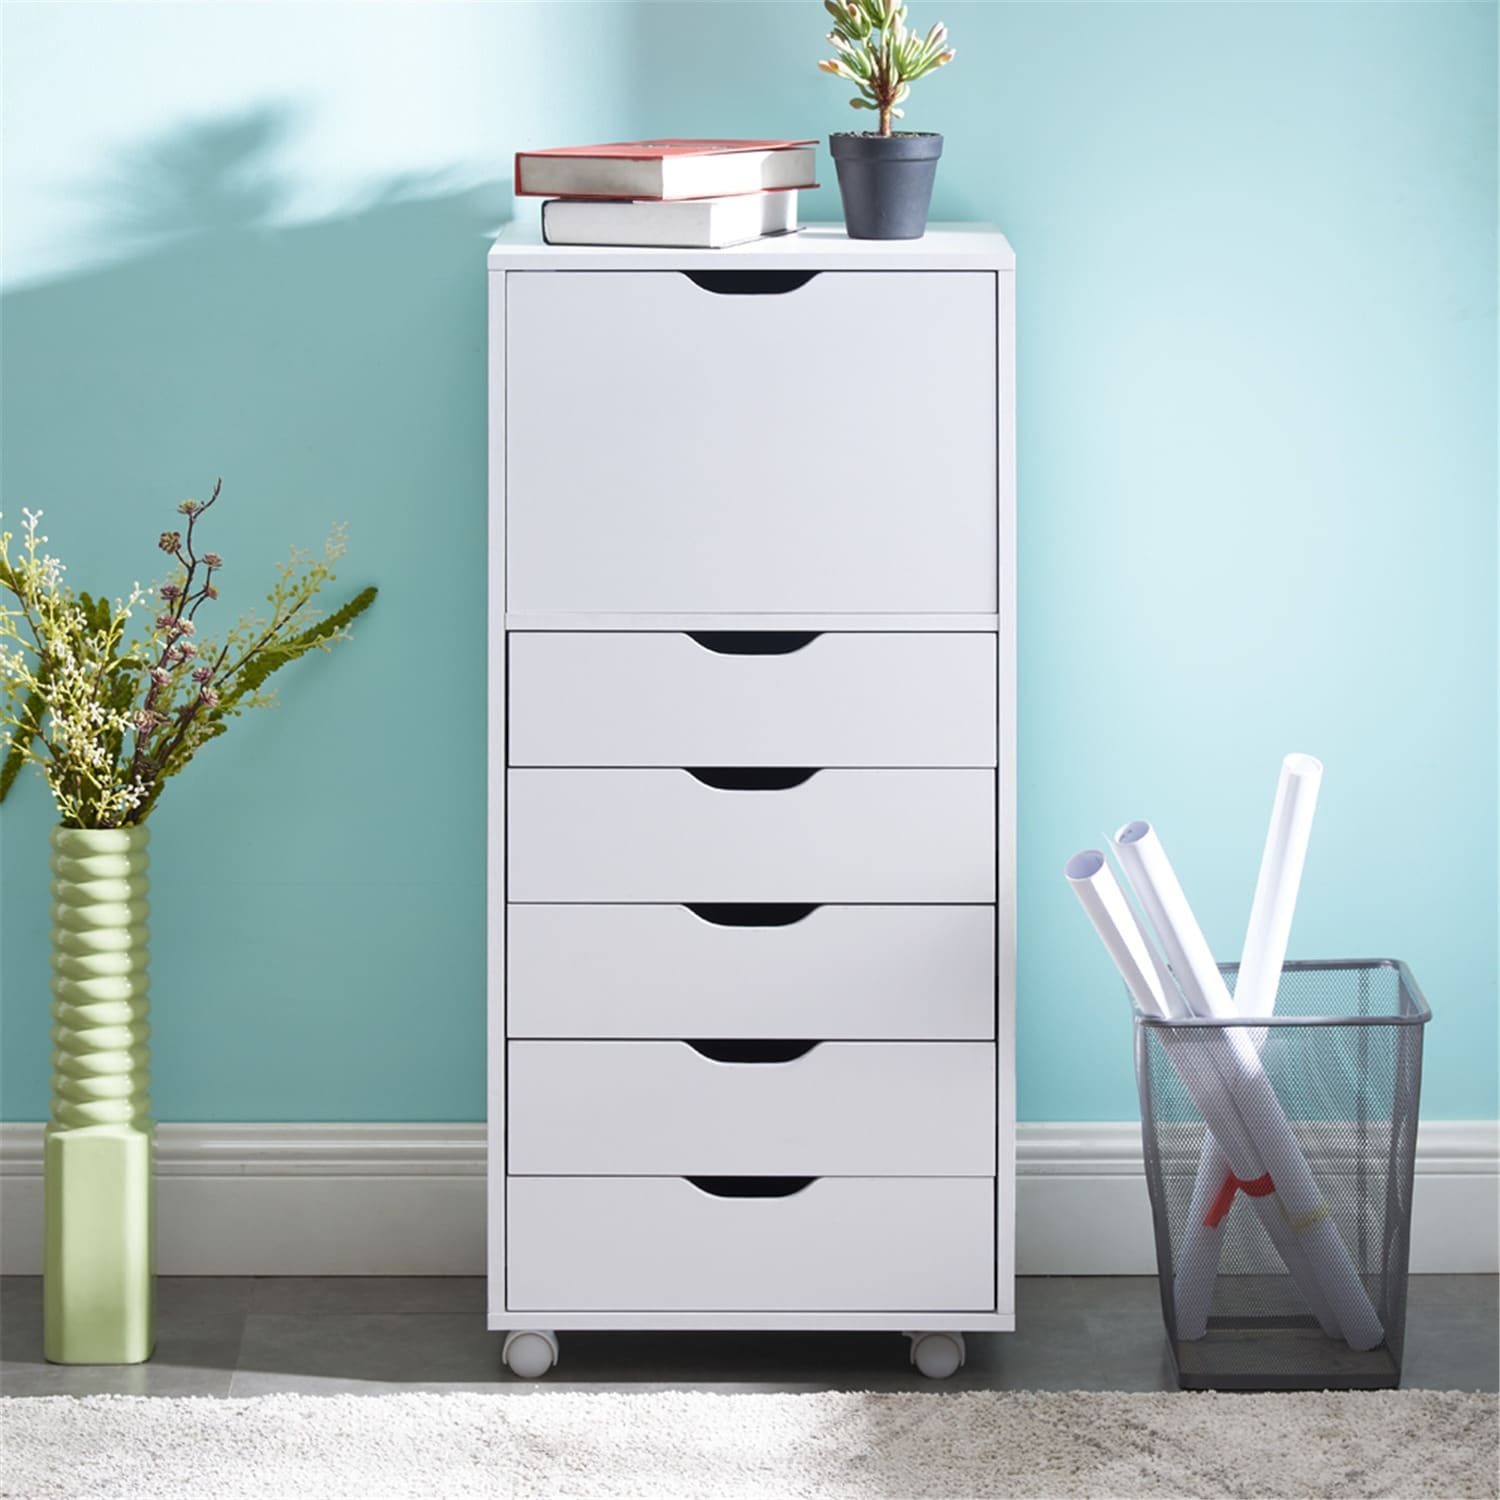 https://ak1.ostkcdn.com/images/products/is/images/direct/bdd990154d8dc3d7d485bf430dfd2b5356704574/Naomi-Home-Carly-6-Drawer-Office-Storage-Cabinet%2C-White.jpg